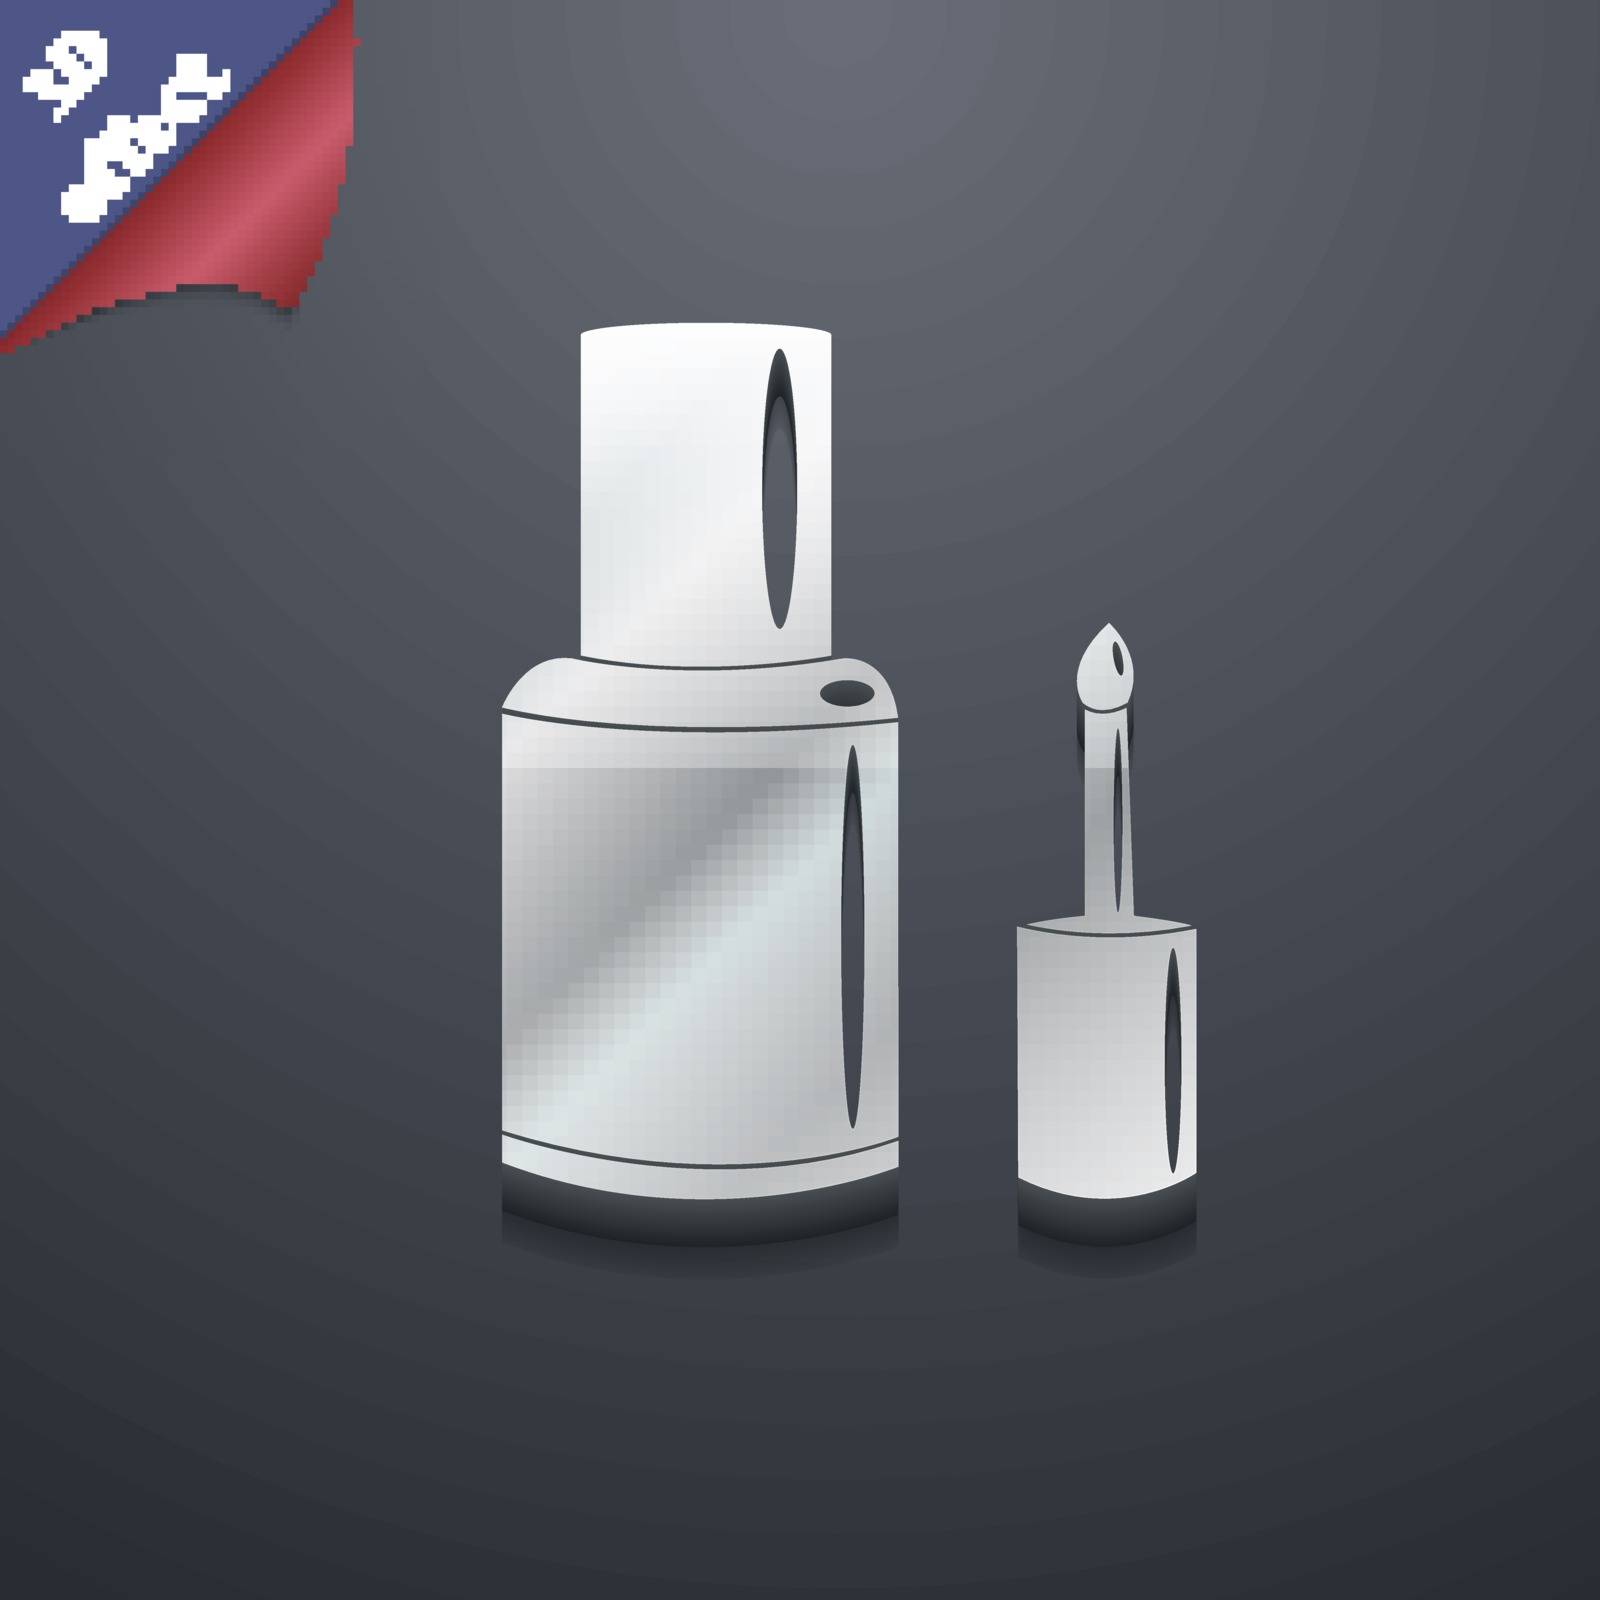 NAIL POLISH BOTTLE icon symbol. 3D style. Trendy, modern design with space for your text Vector illustration